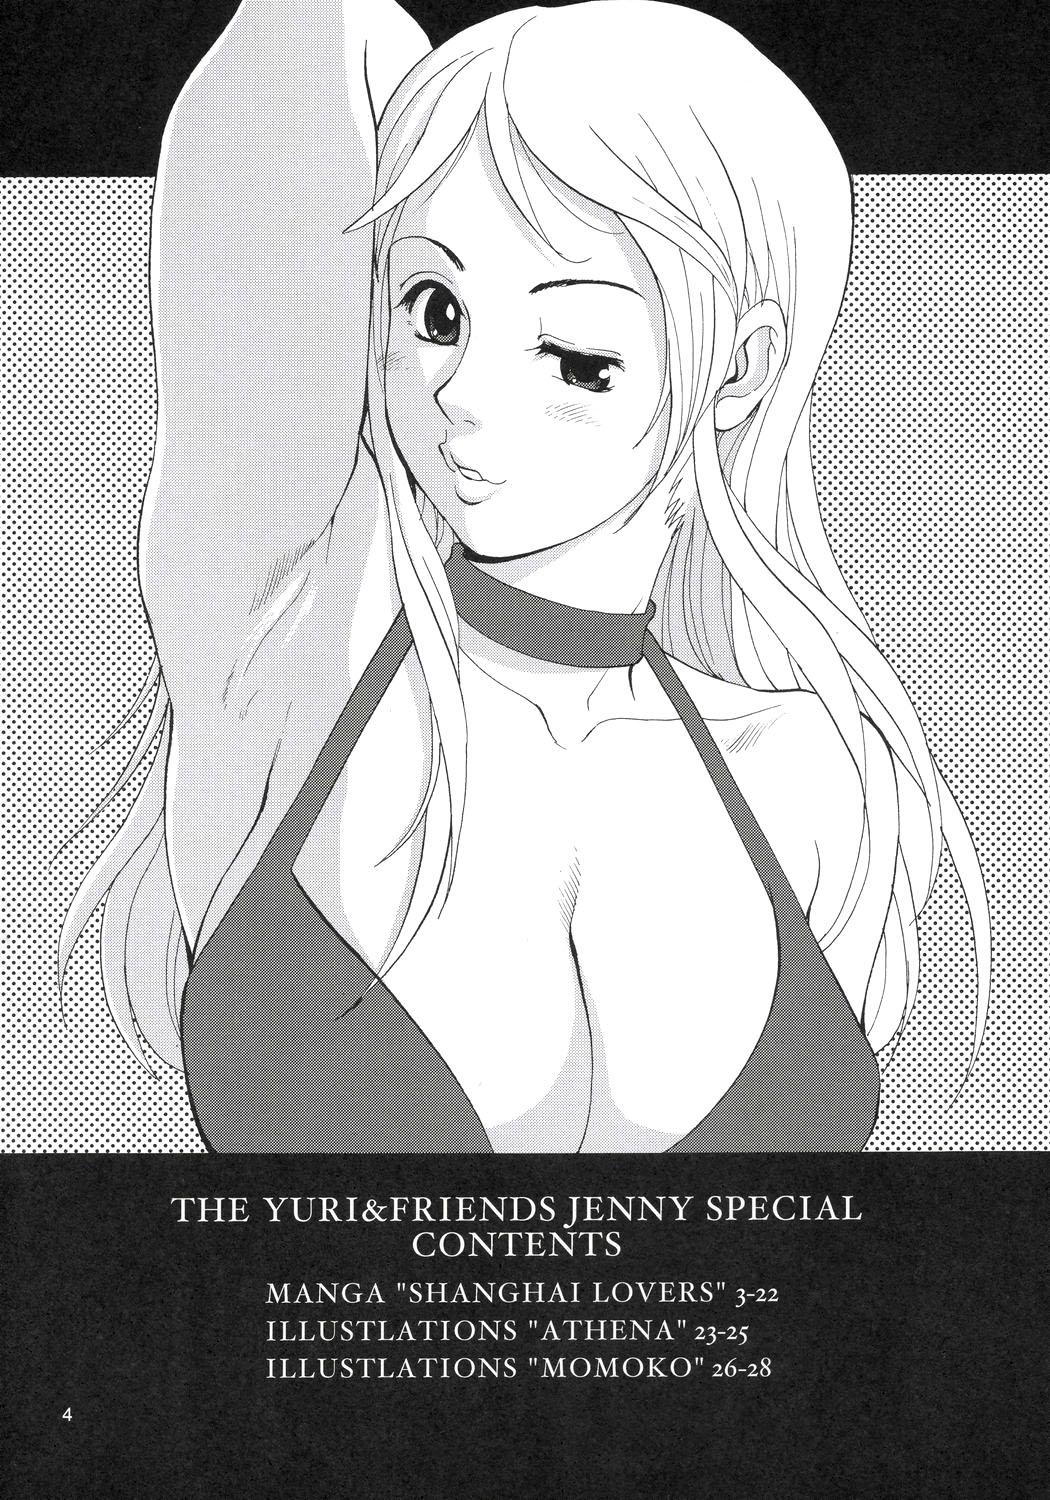 Stroking Yuri & Friends Jenny Special - King of fighters Female - Page 3